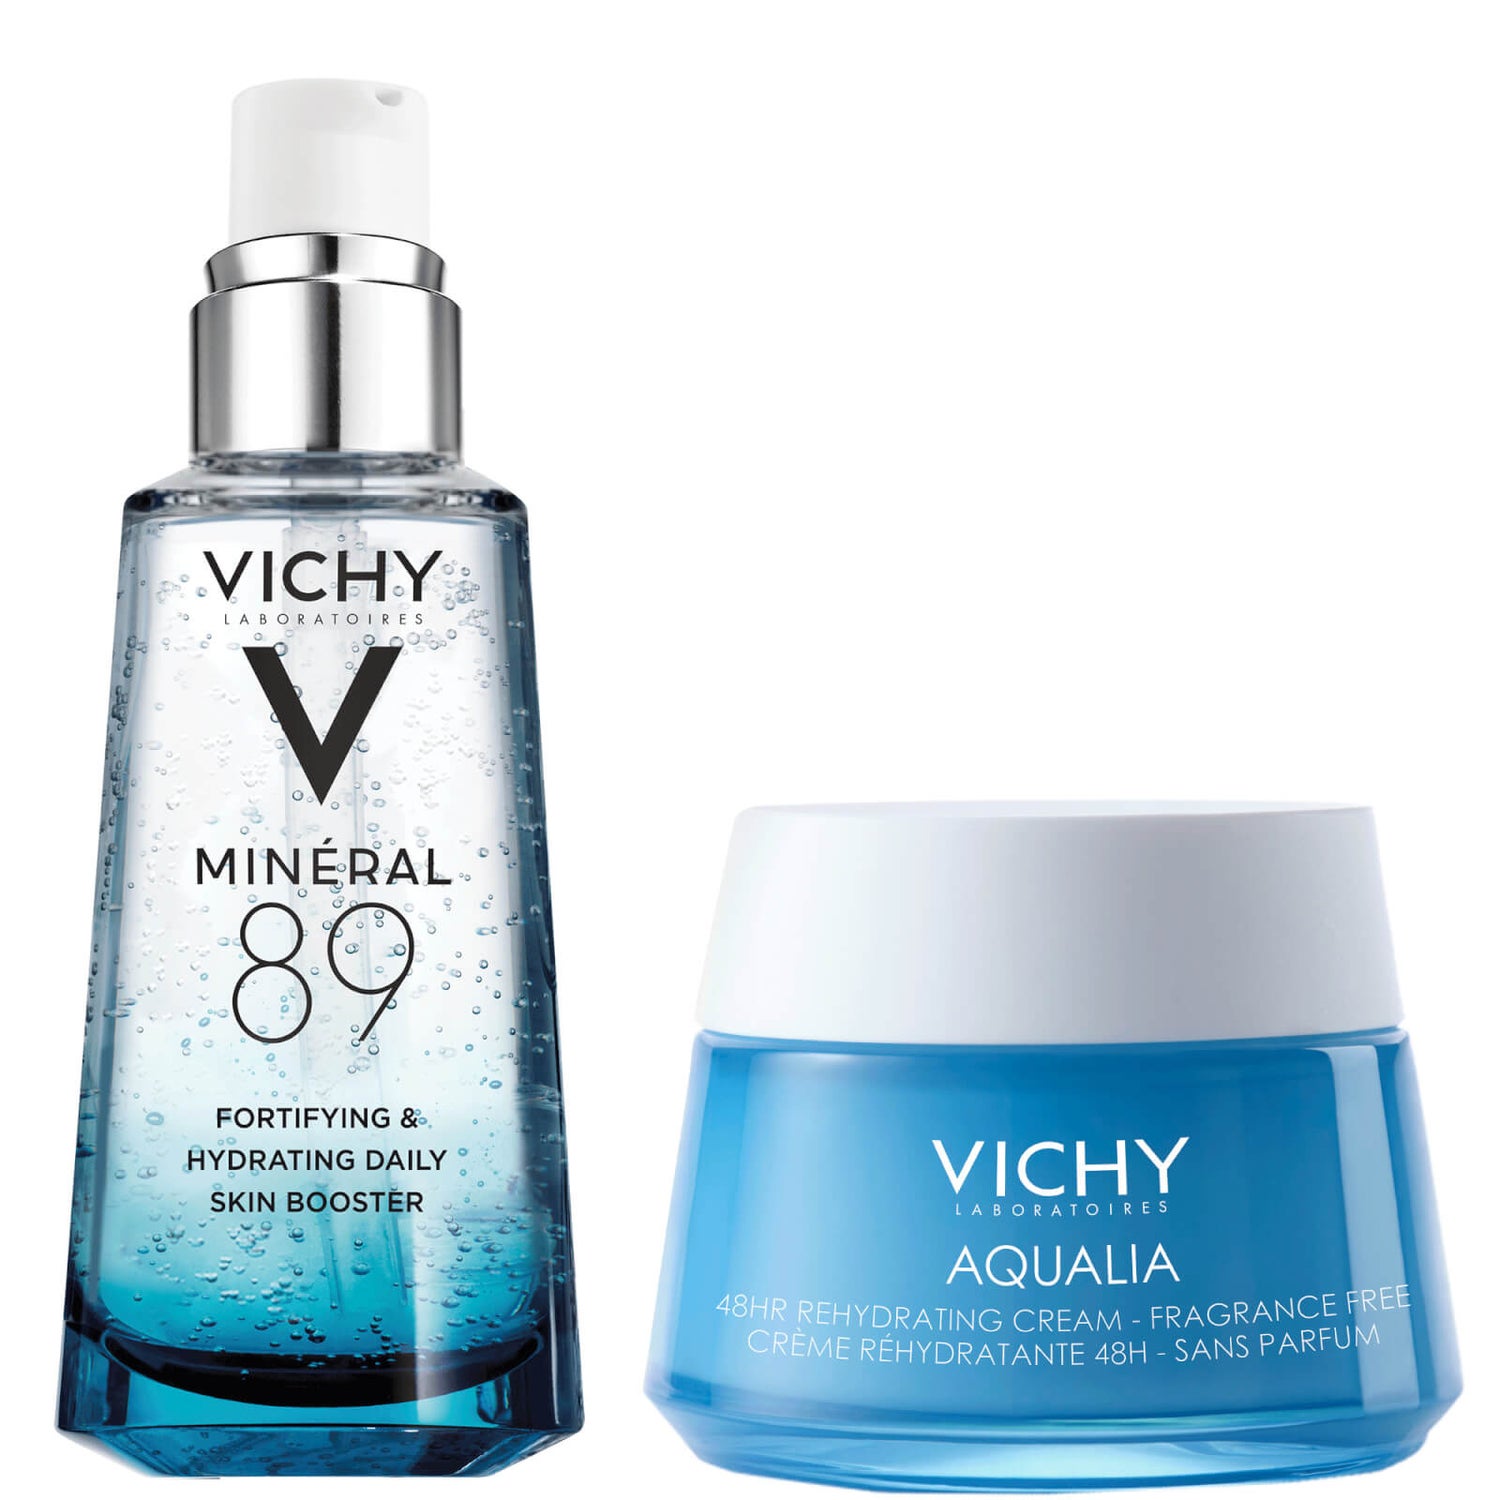 Vichy Dual Hydration Kit with Hyaluronic Acid Face Serum & Moisturizer (Worth $61.00)